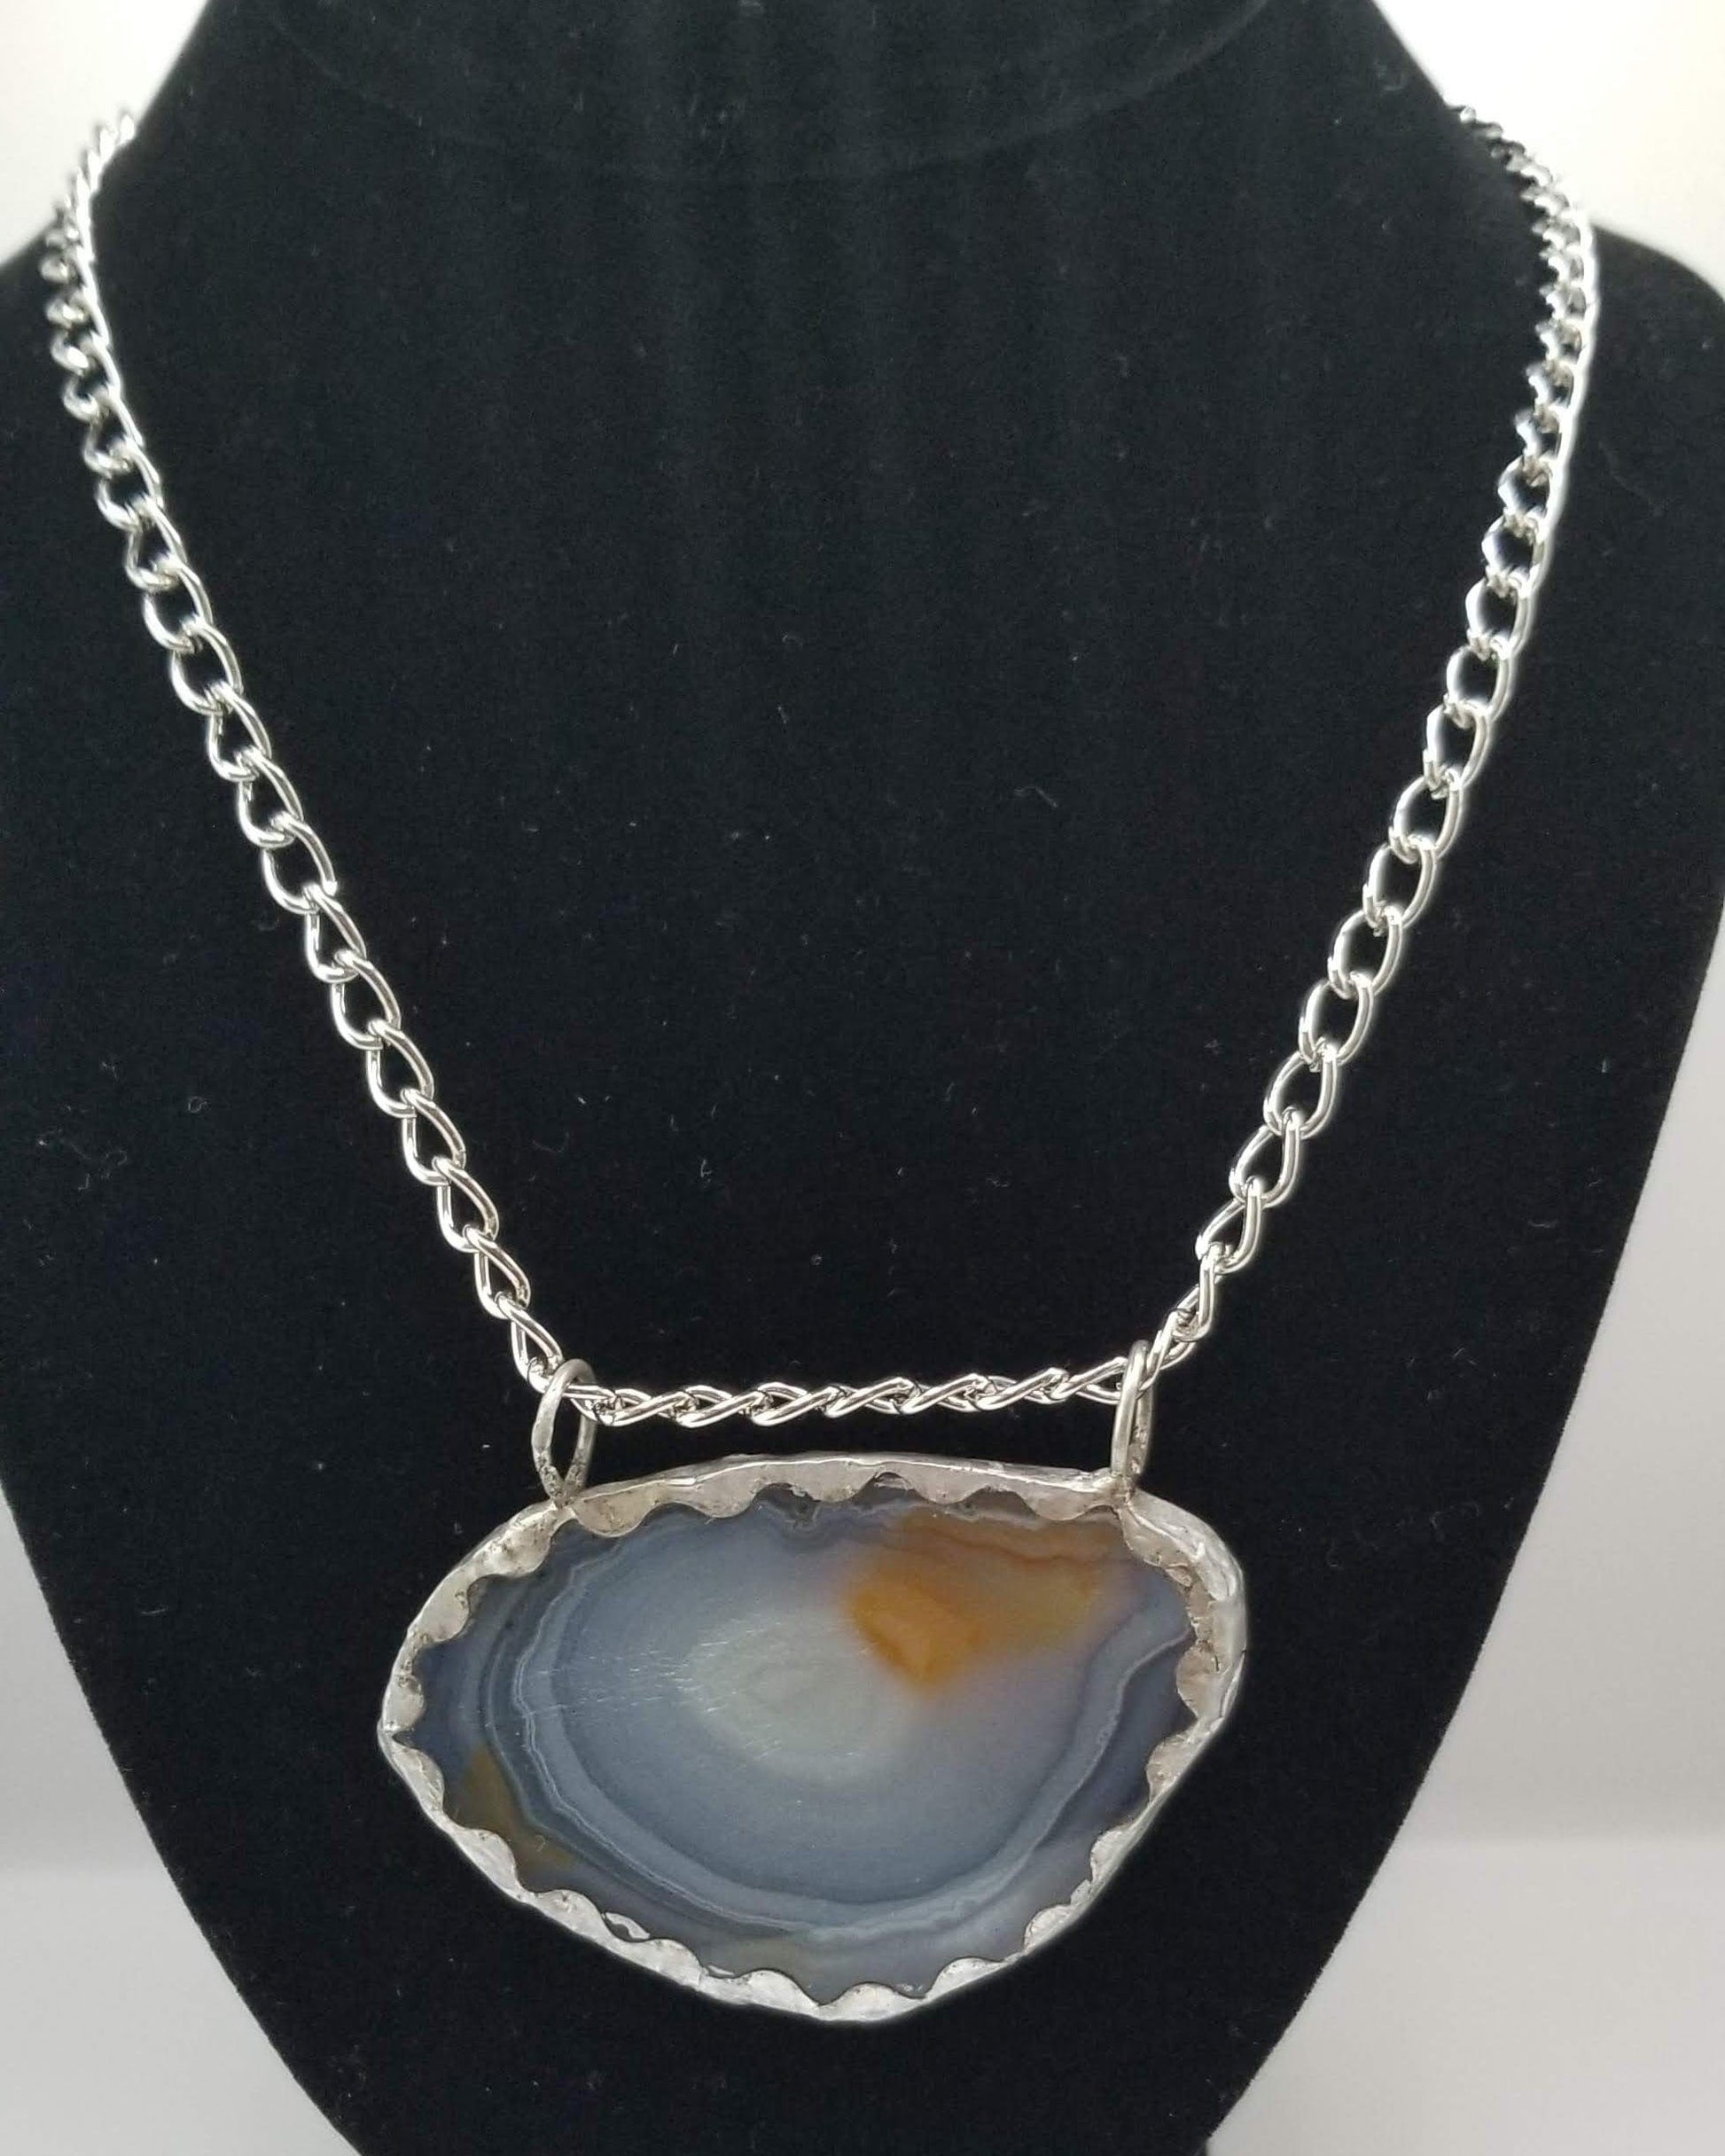 Handcrafted Jewelry By Teri C Necklace Stunning Agate Pendant Necklace For Elegant Look